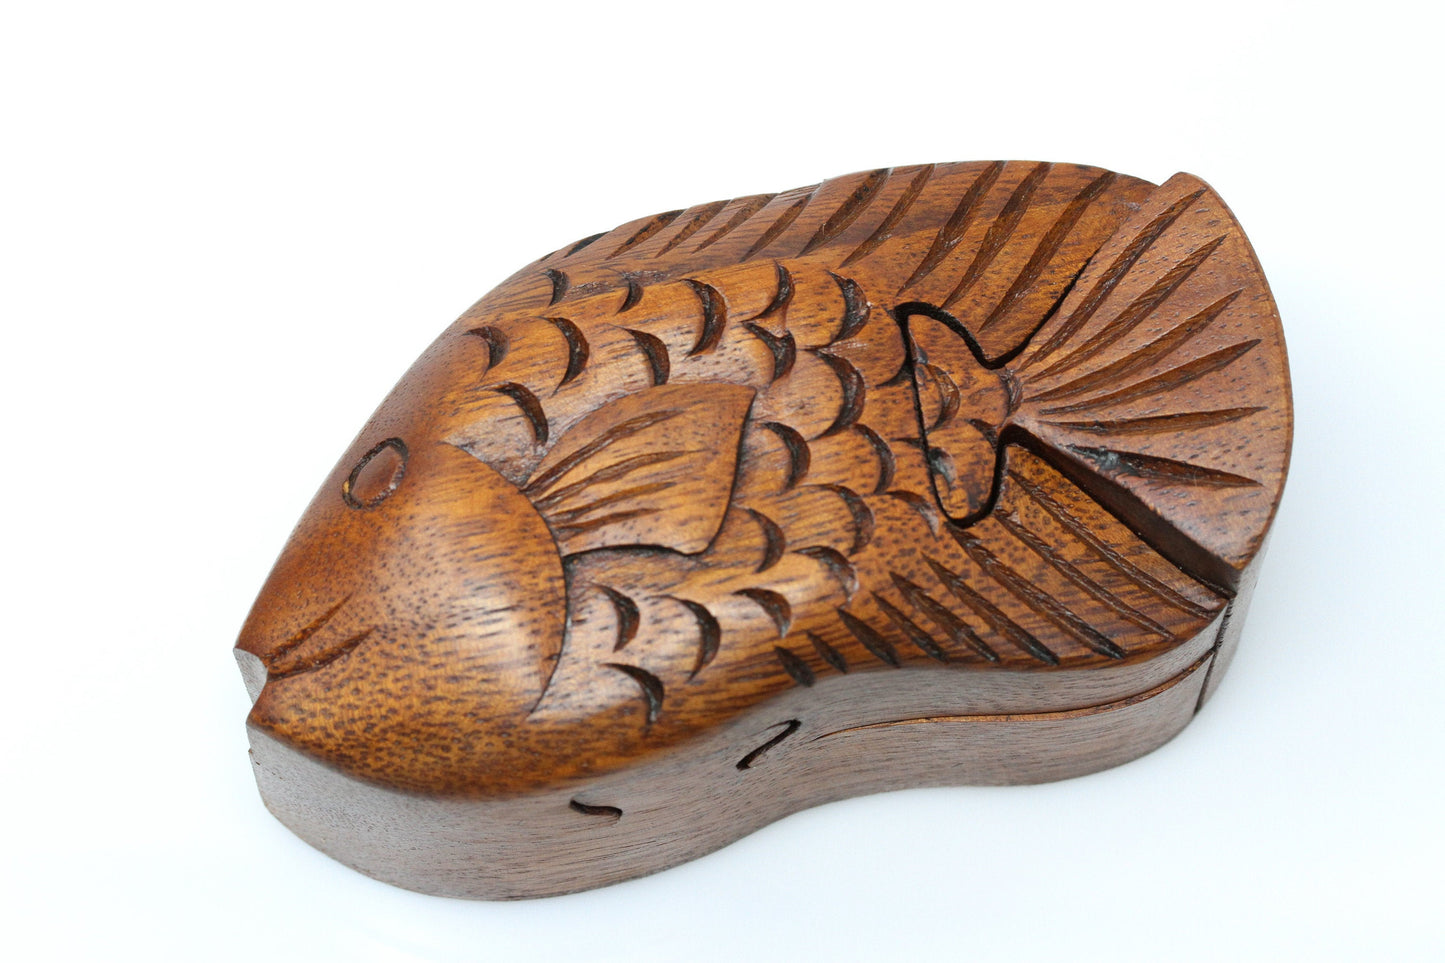 Fish secret puzzle box - hand carved wooden box